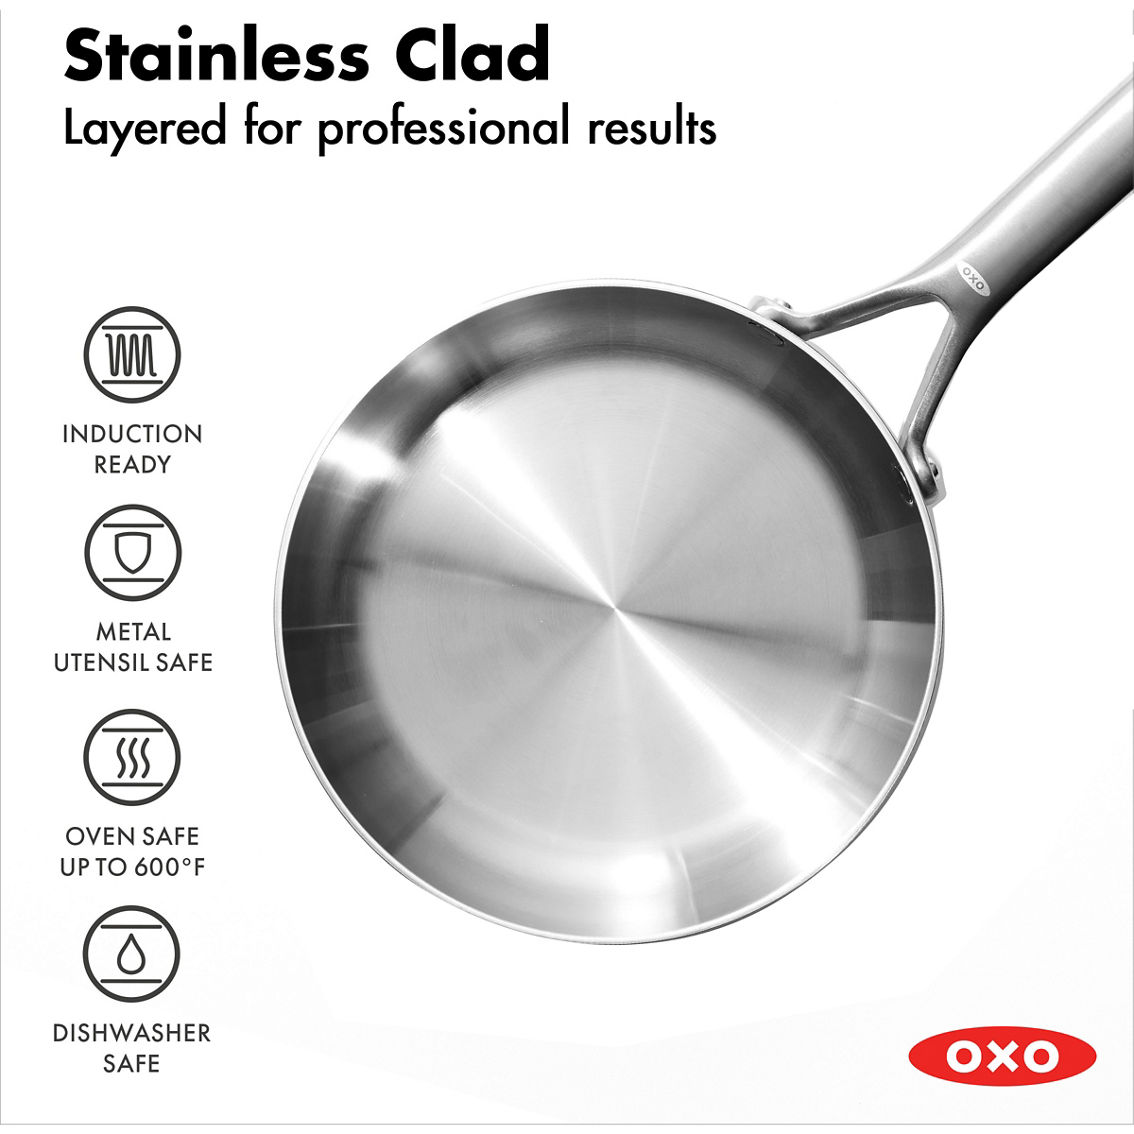 OXO Mira 3-Ply Stainless Steel Frying Pan - Image 2 of 6